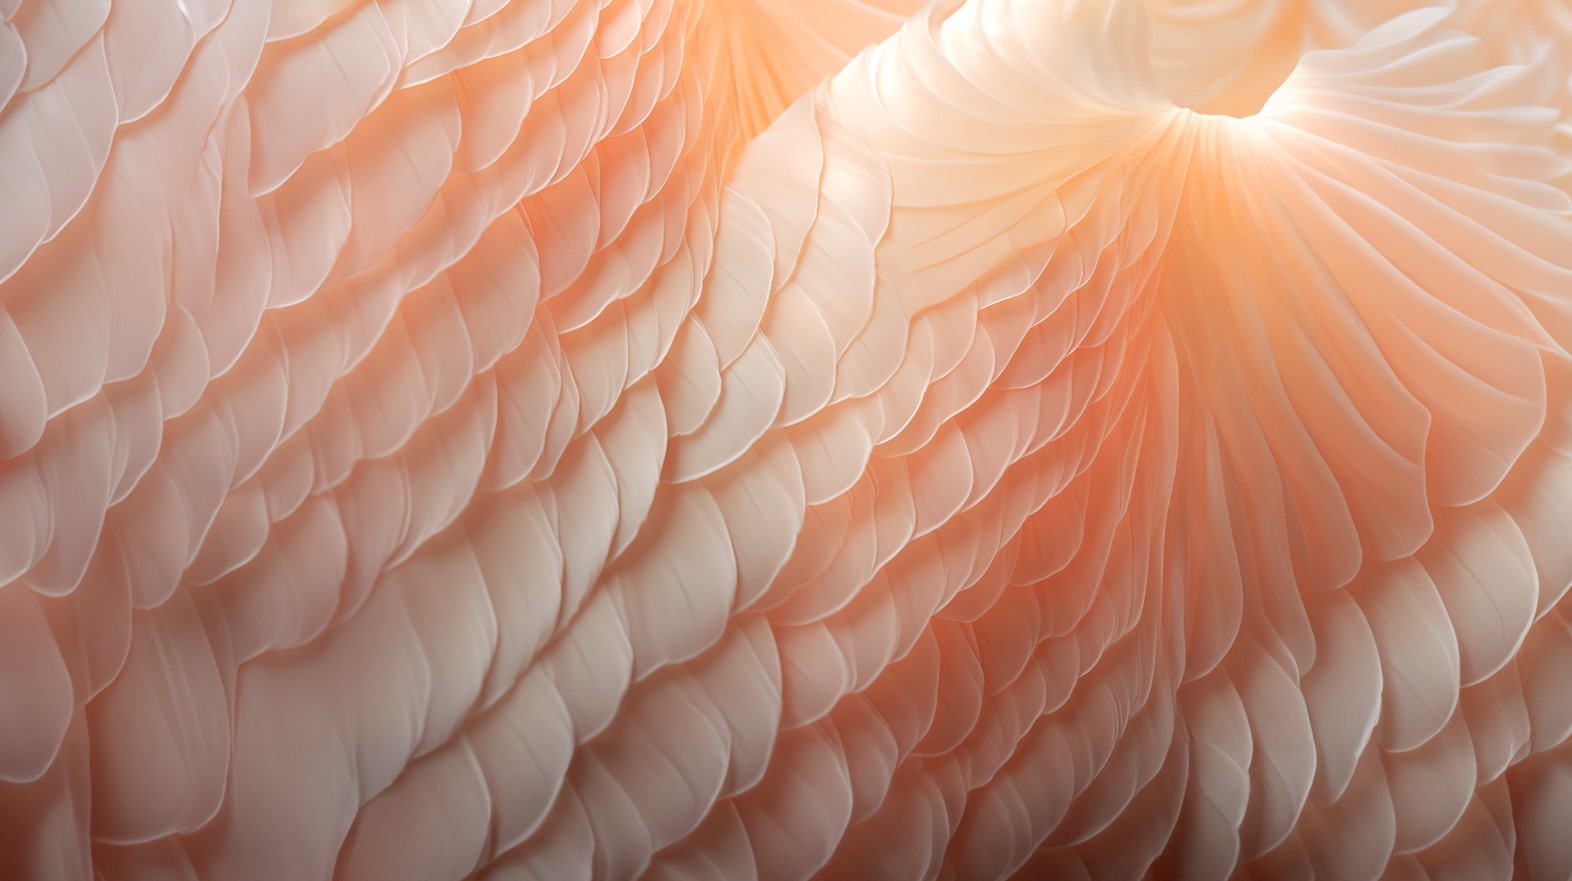 PAN_COY_Categories_Texture_Feathers_2023_11-21